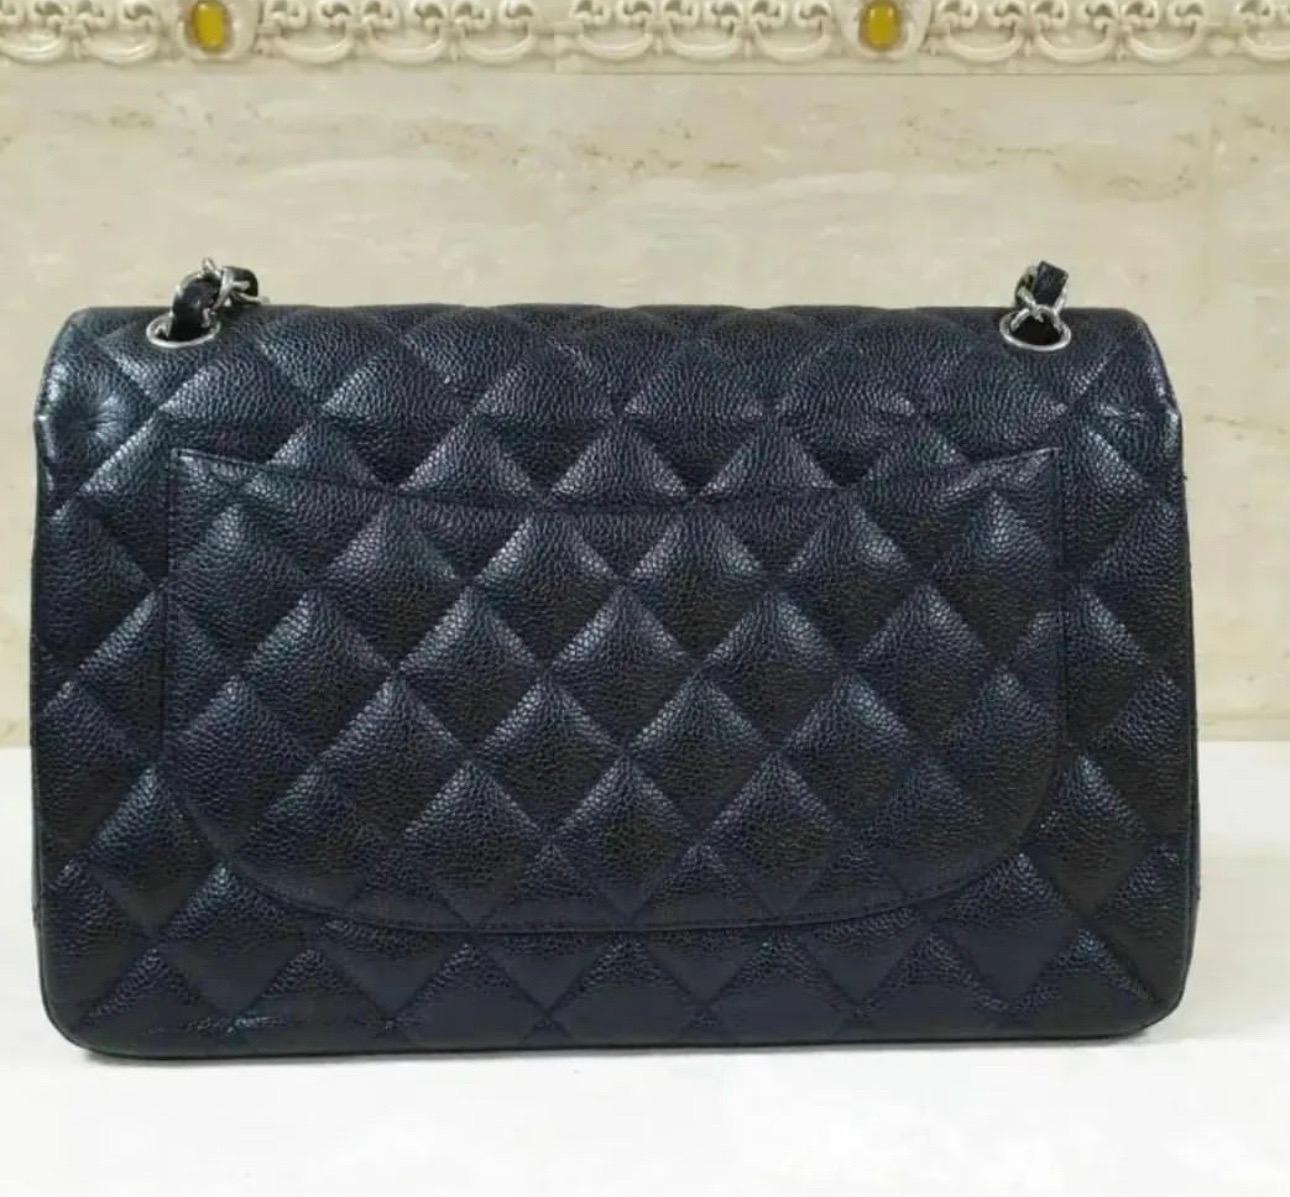 CHANEL Timeless Black Large Double Flap Caviar Crossbody Shoulder Bag In Good Condition For Sale In Krakow, PL